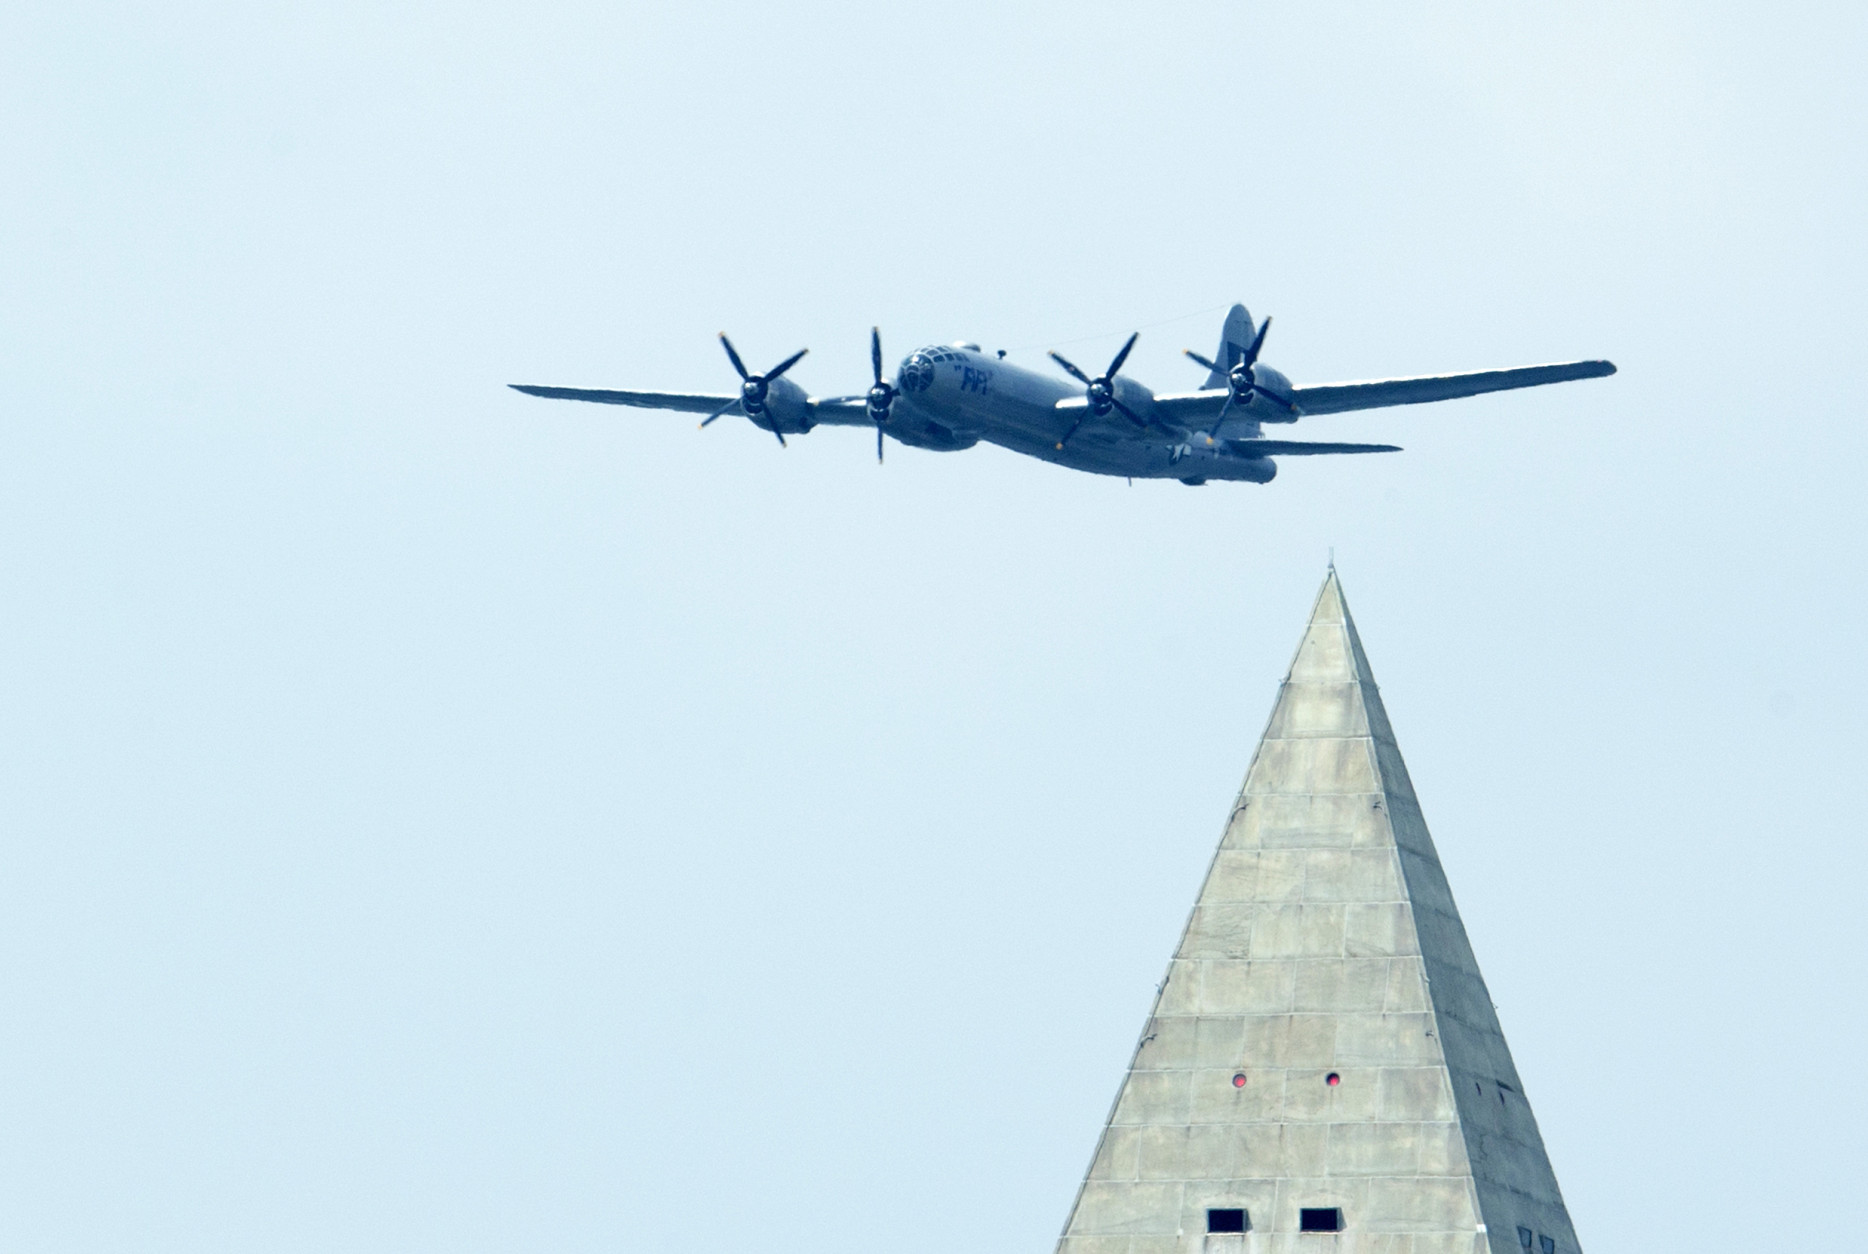 A Boeing B-29 Superfortress flies near the Washington Monument in Washington, Friday, May 8, 2015, during a flyover of World War II vintage aircrafts, marking the 70th anniversary of the end of the war in Europe on May 8, 1945, and commemorate the Allied victory in Europe during World War II. (AP Photo/Manuel Balce Ceneta)